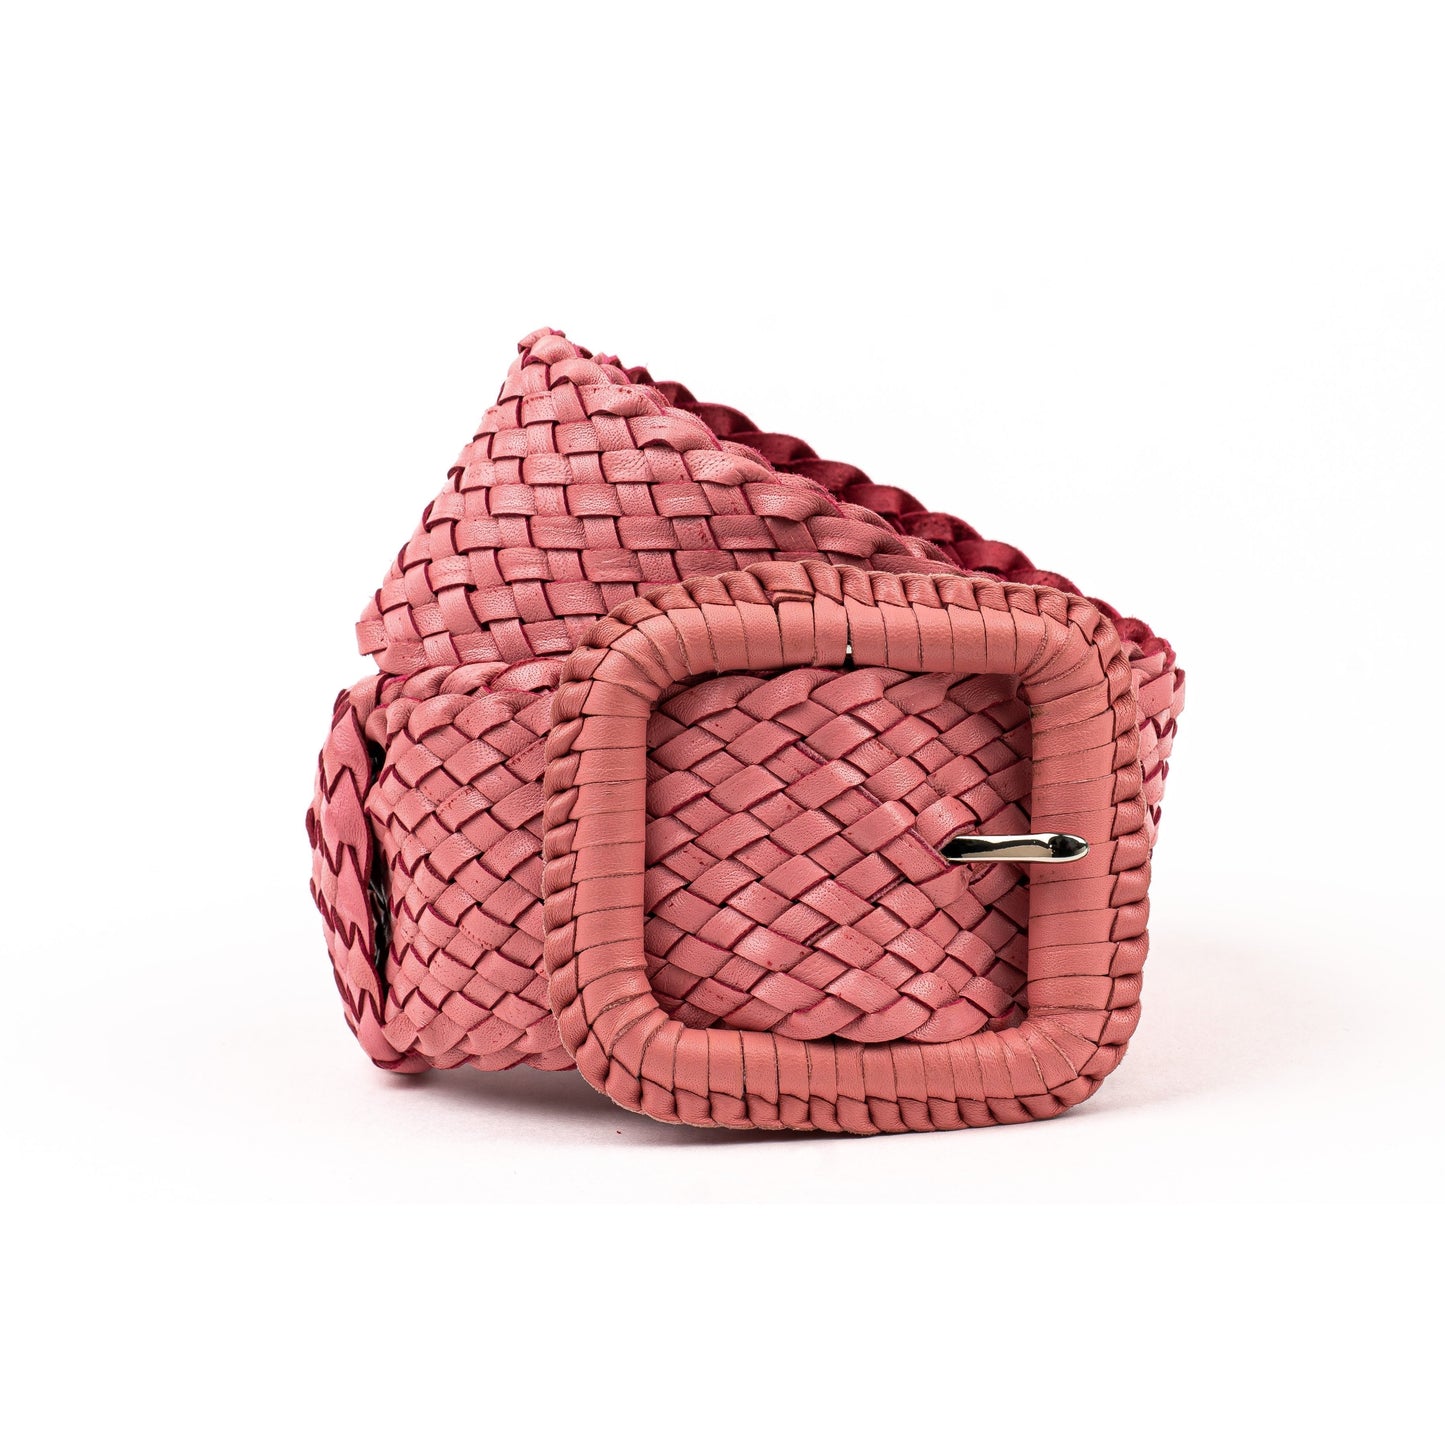 Woven pink belt on white.